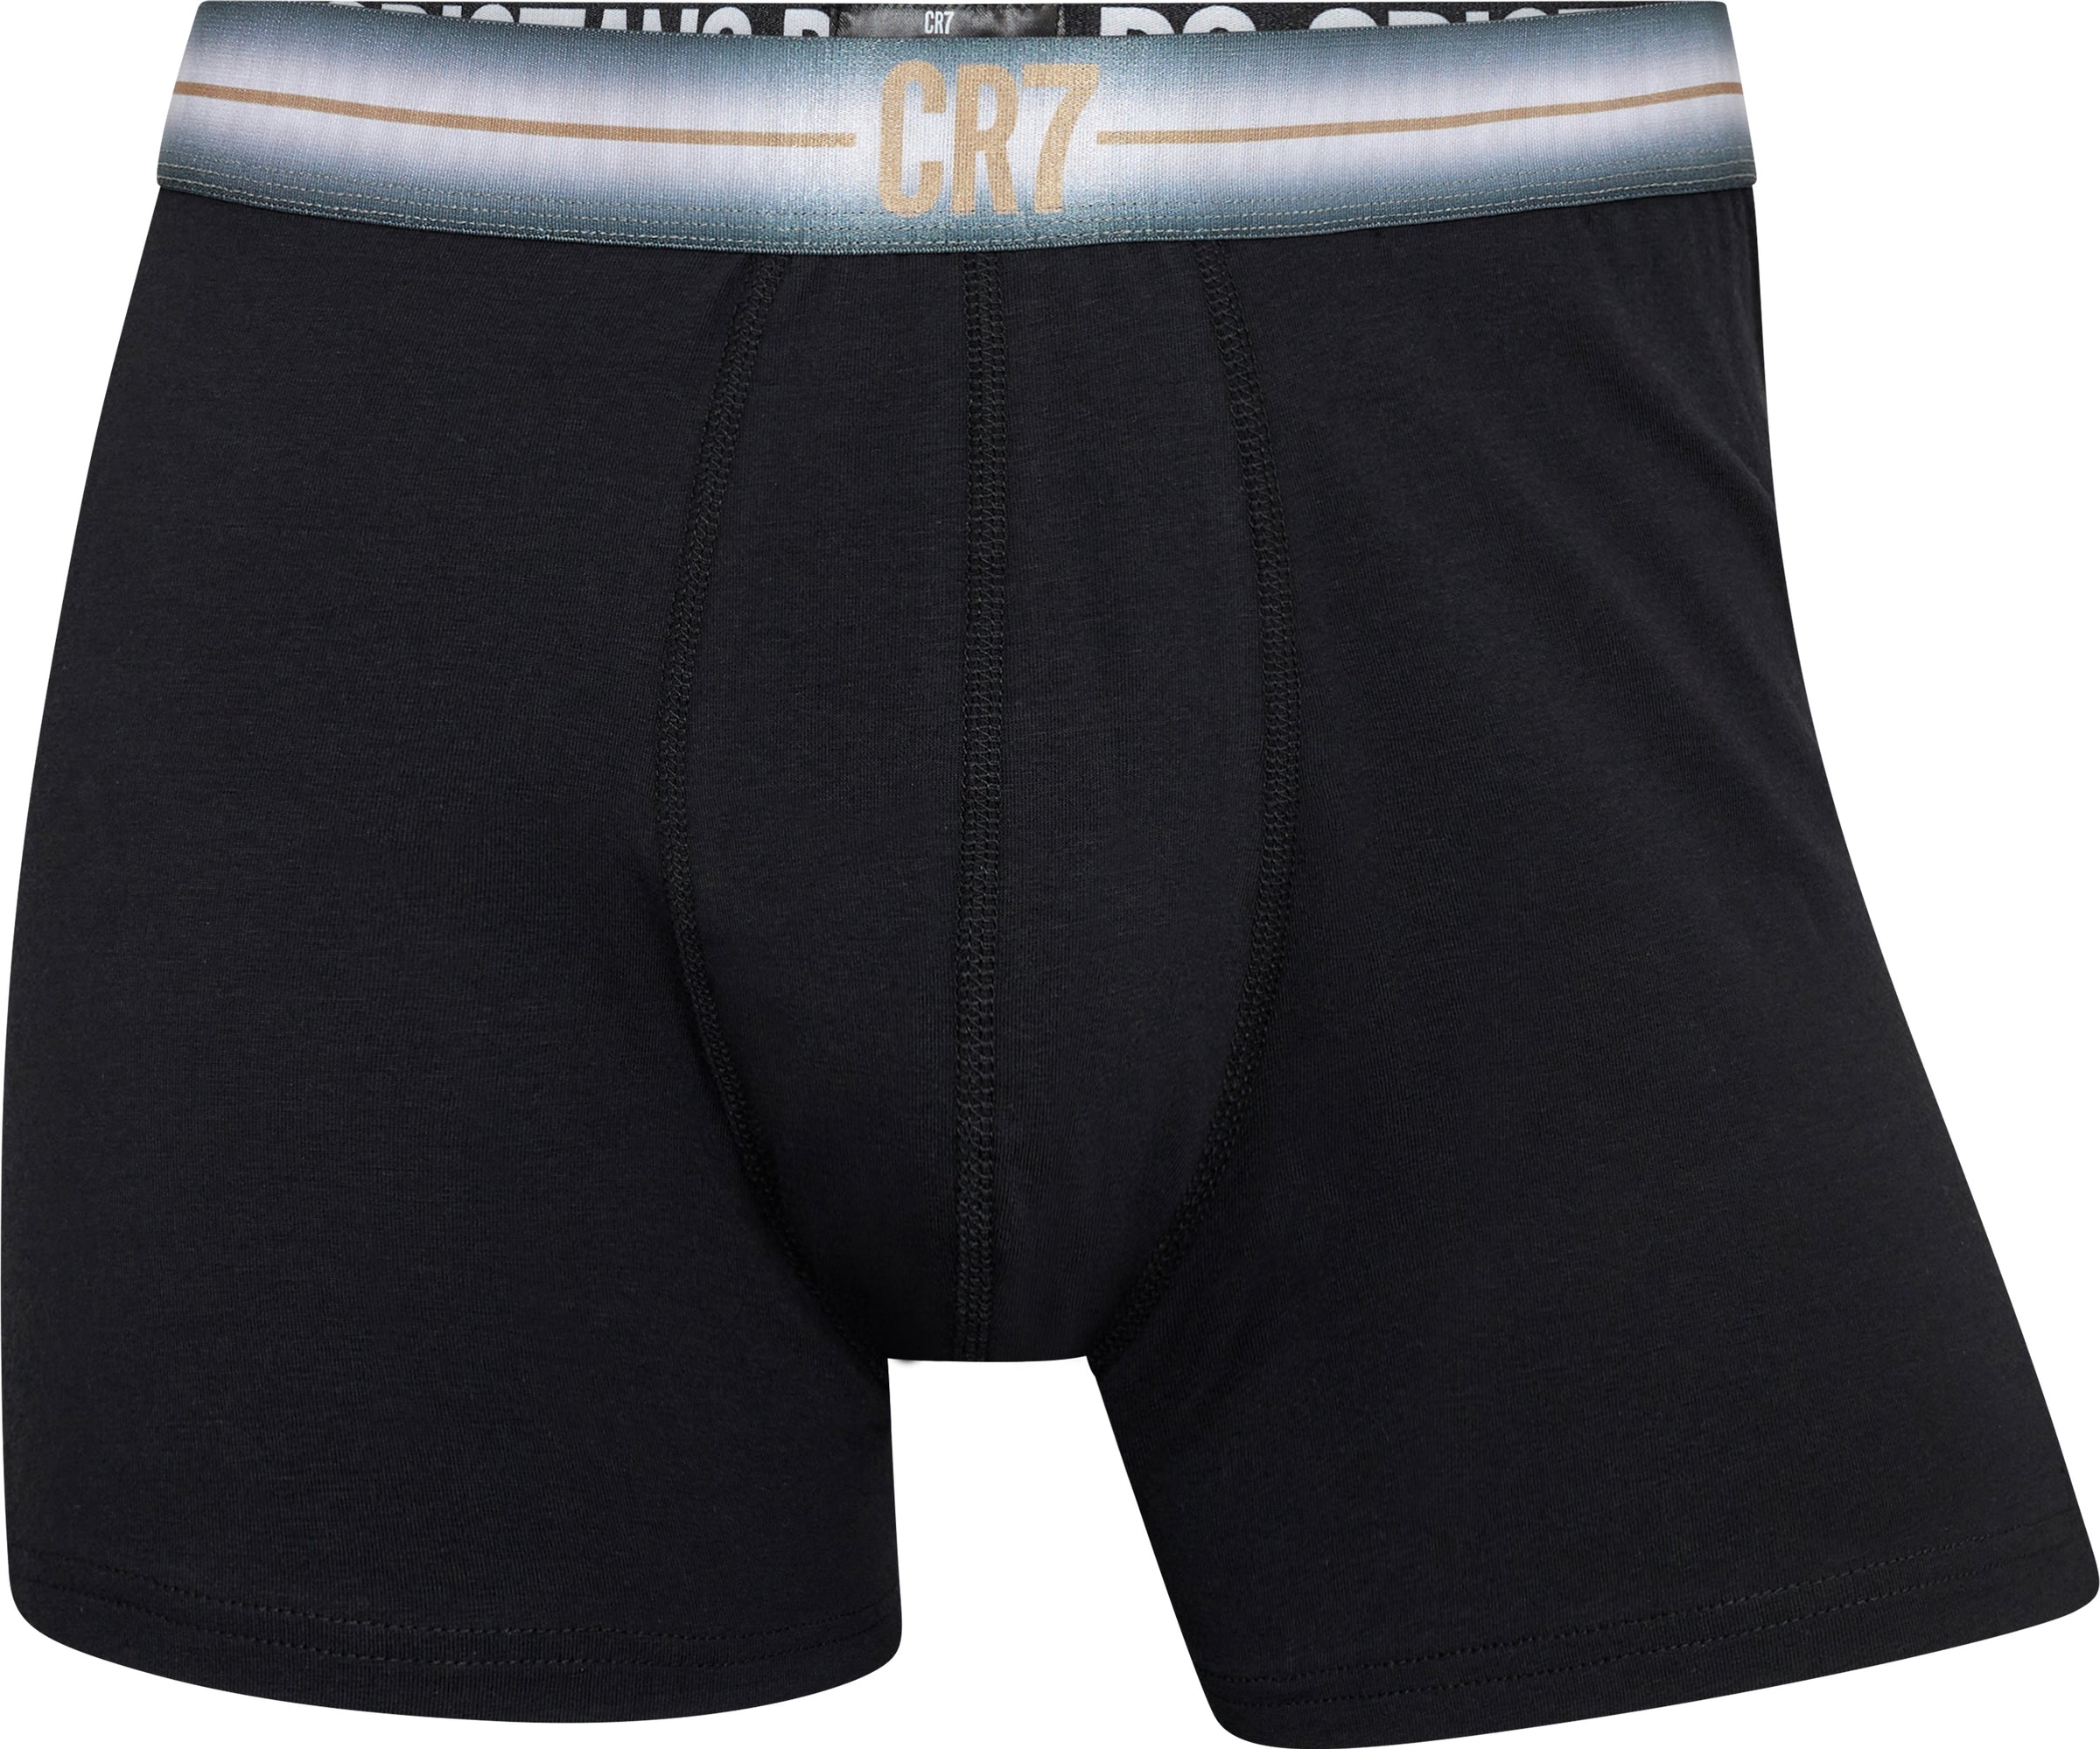  CR7 Men's 2-Pack Trunks, Organic Cotton Blend (XX-Large) Black  : Clothing, Shoes & Jewelry